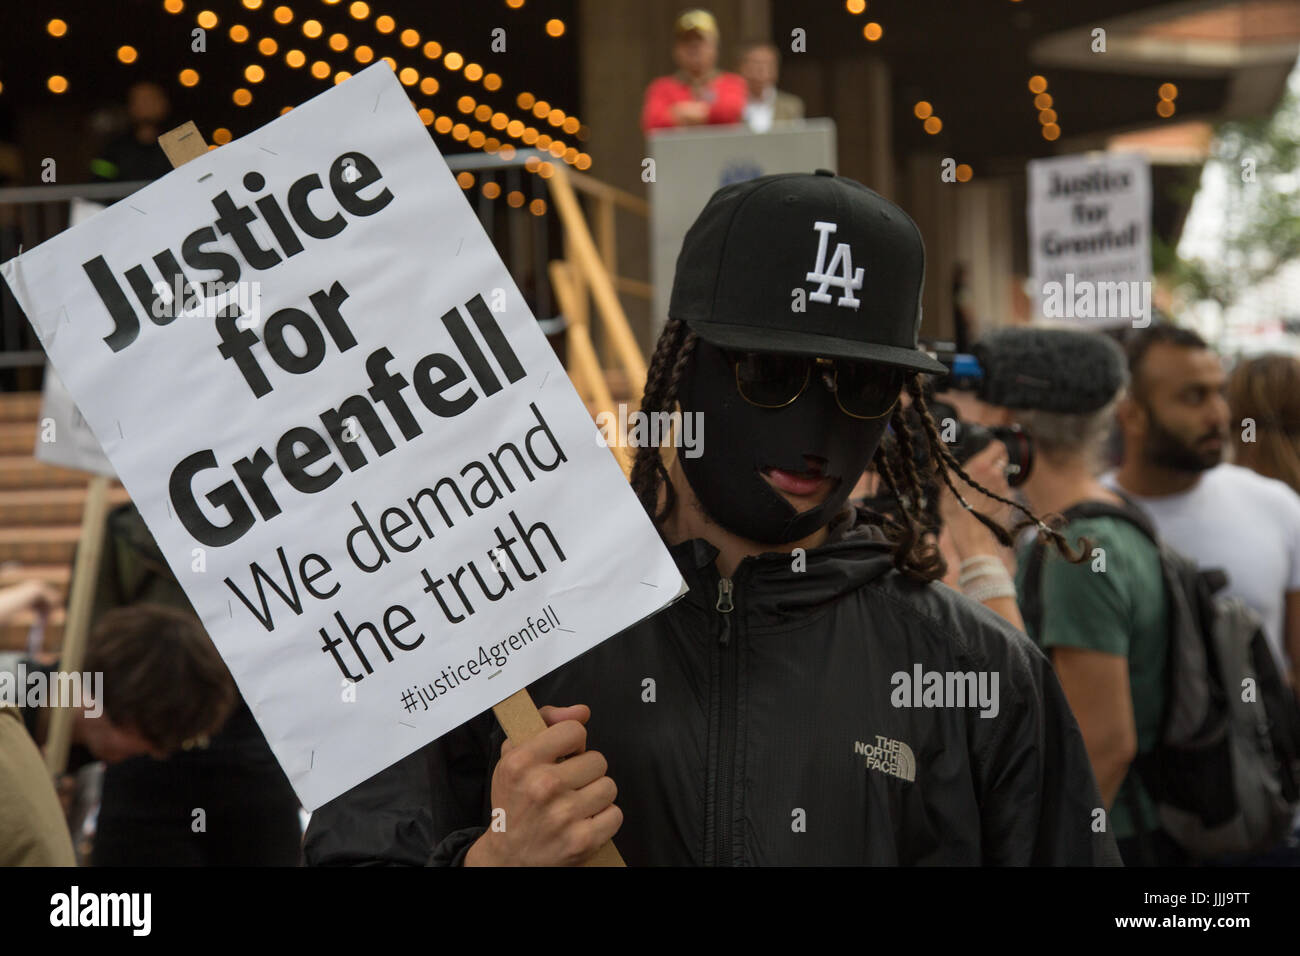 London, UK. 19th July, 2017. Protesters out side Kensington and Chelsea town hall during first full council meeting since June 14, 2017 Grenfell Tower fire which claimed at least 80 lives. July 2017 Protesters out side Kensington and Chelsea town hall during first full council meeting since June 14, 2017 Grenfell Tower fire which claimed at least 80 lives. Credit: Thabo Jaiyesimi/Alamy Live News Stock Photo